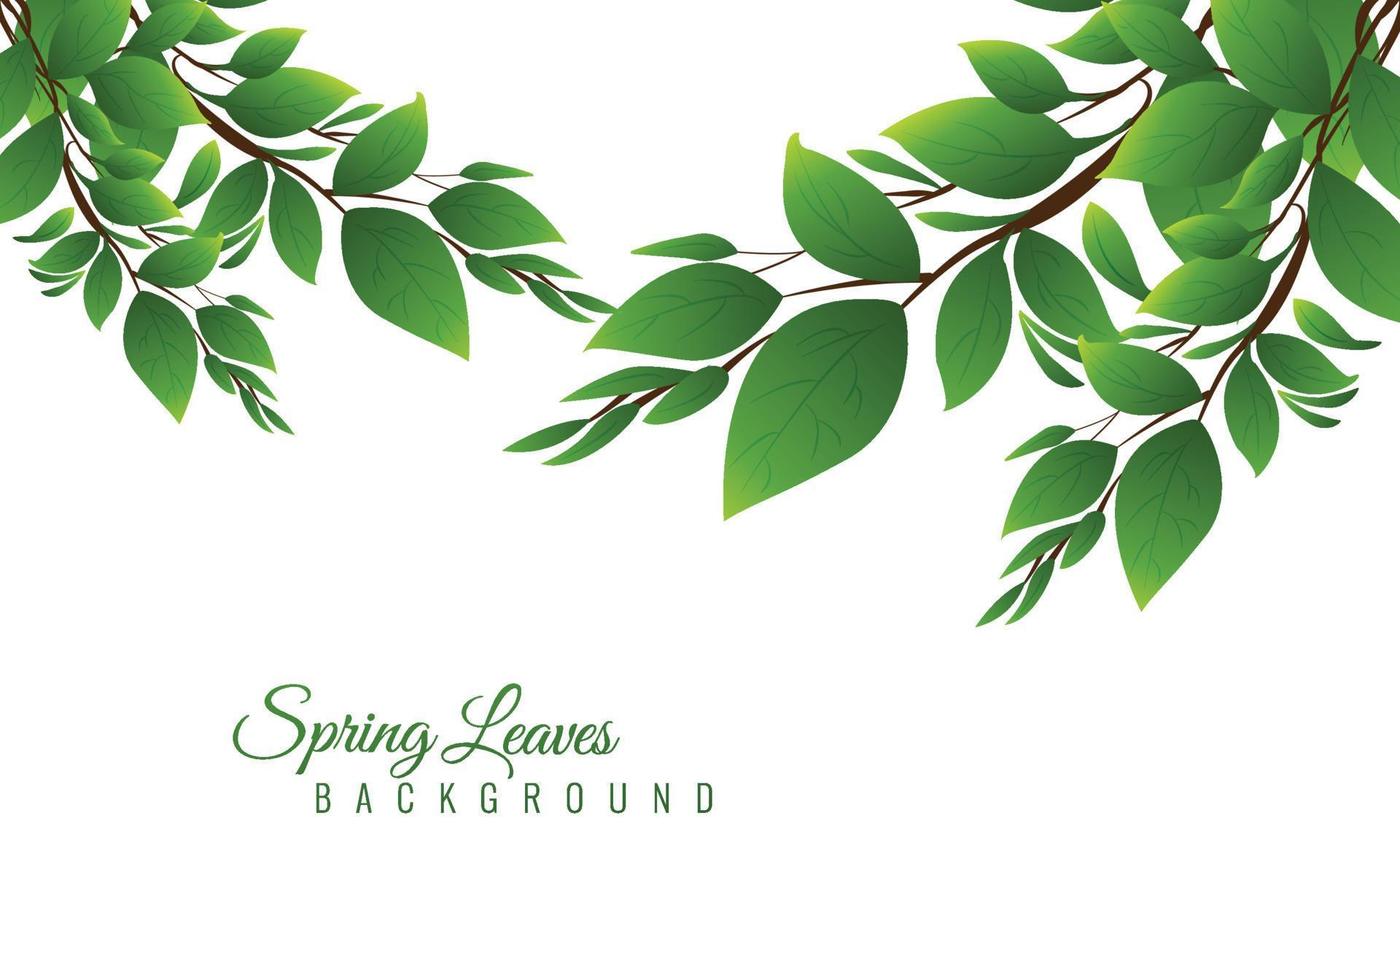 Illustration nature background with green leaves vector